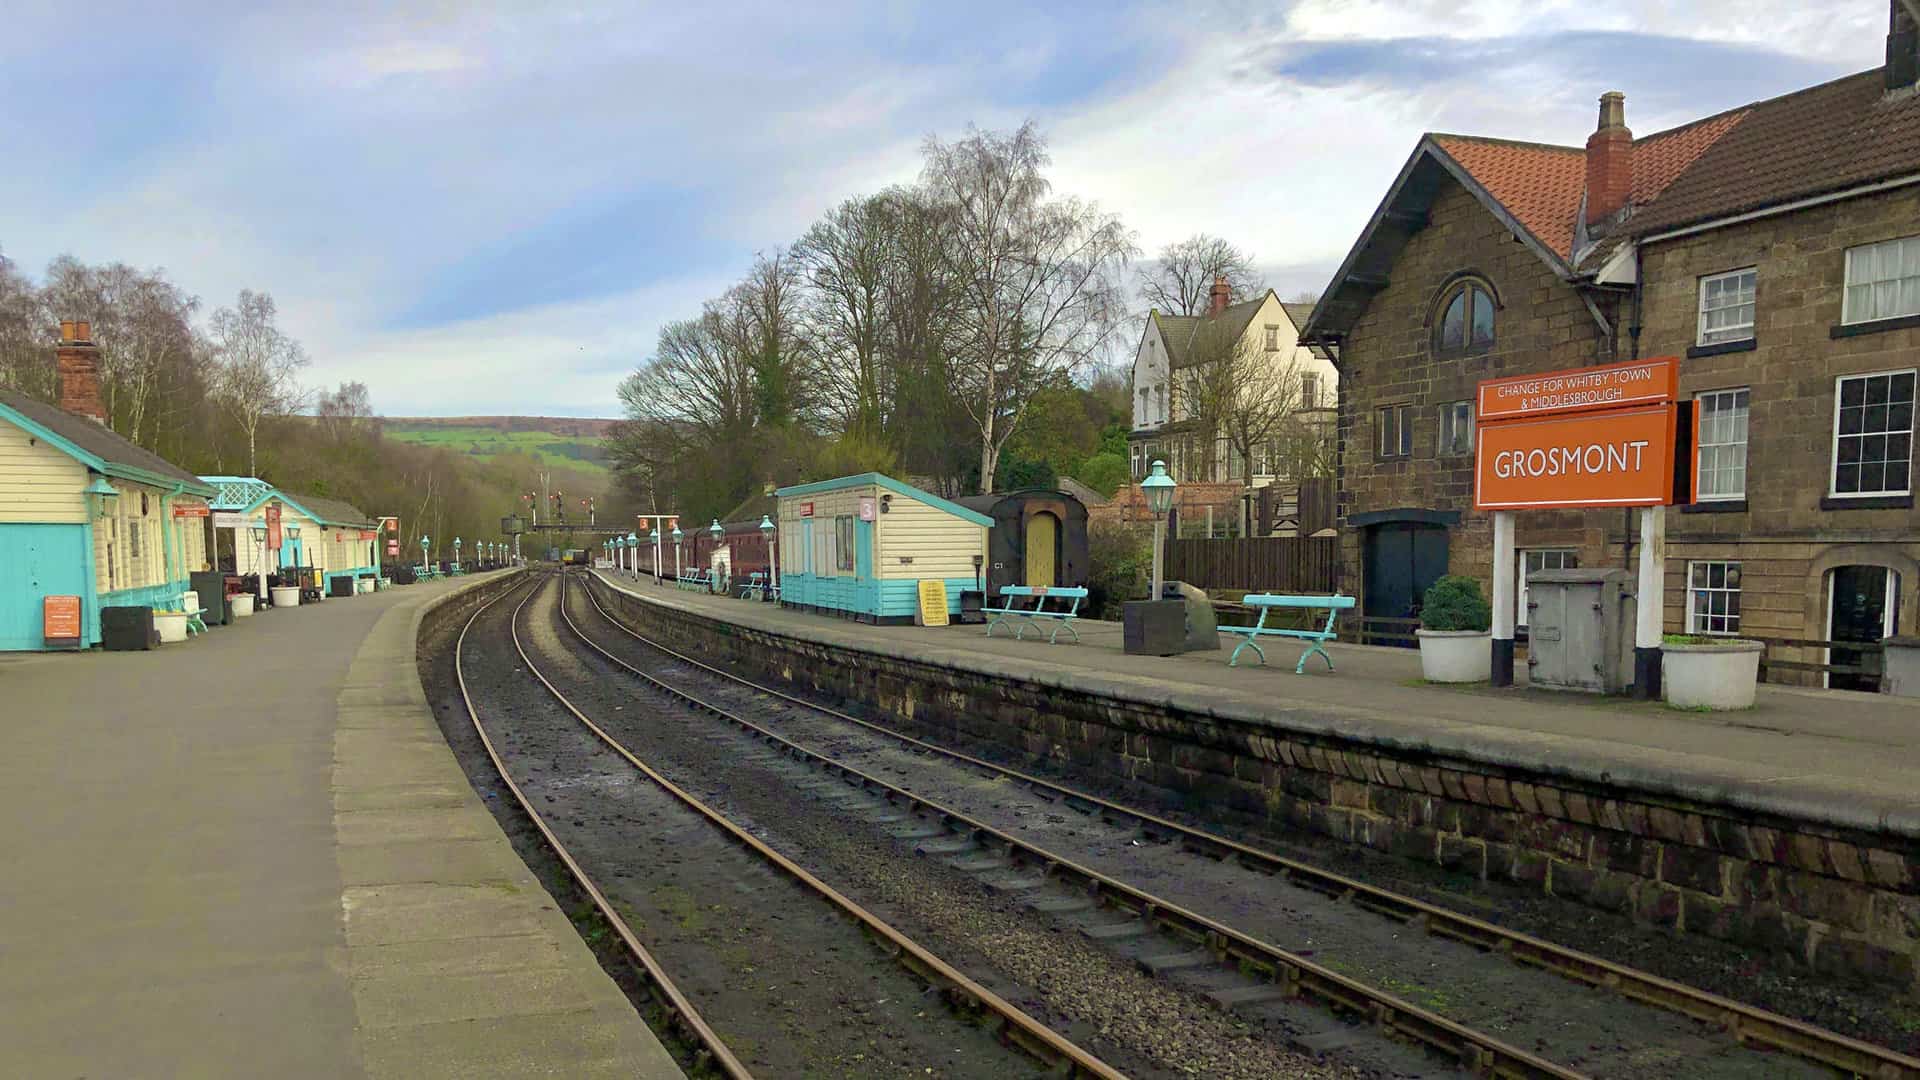 The picturesque railway station at Grosmont.